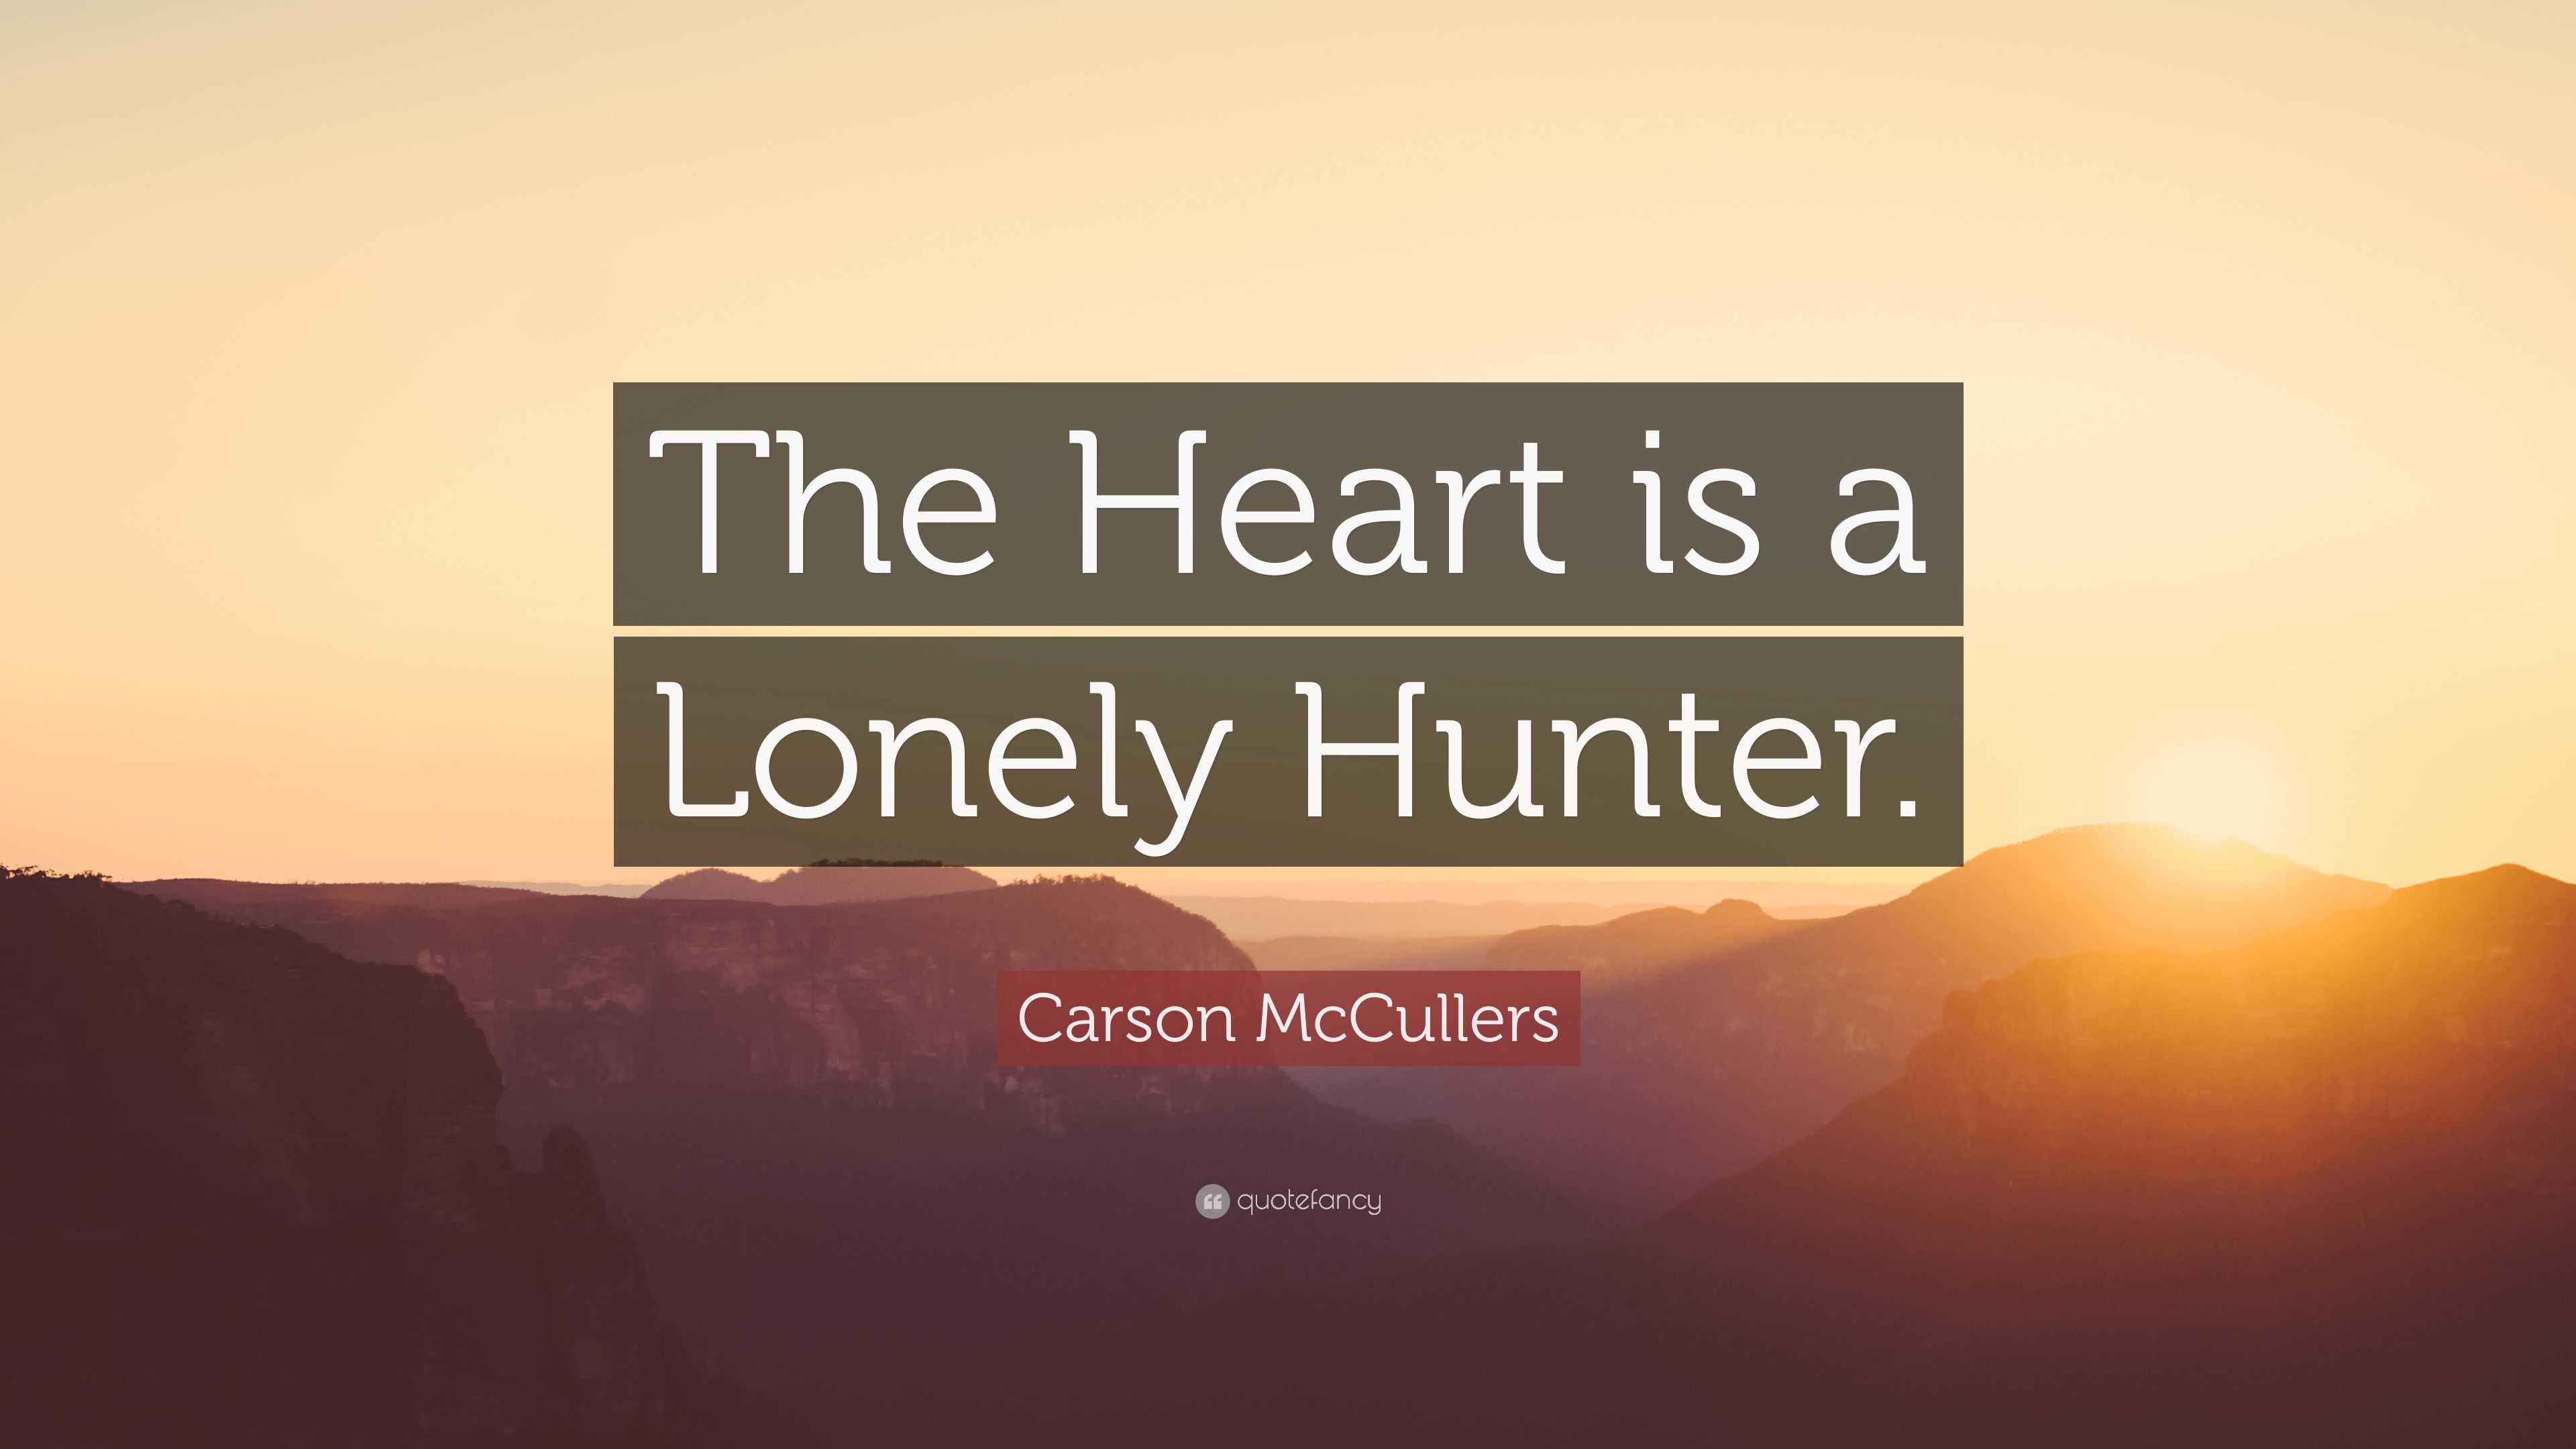 mccullers carson the heart is a lonely hunter